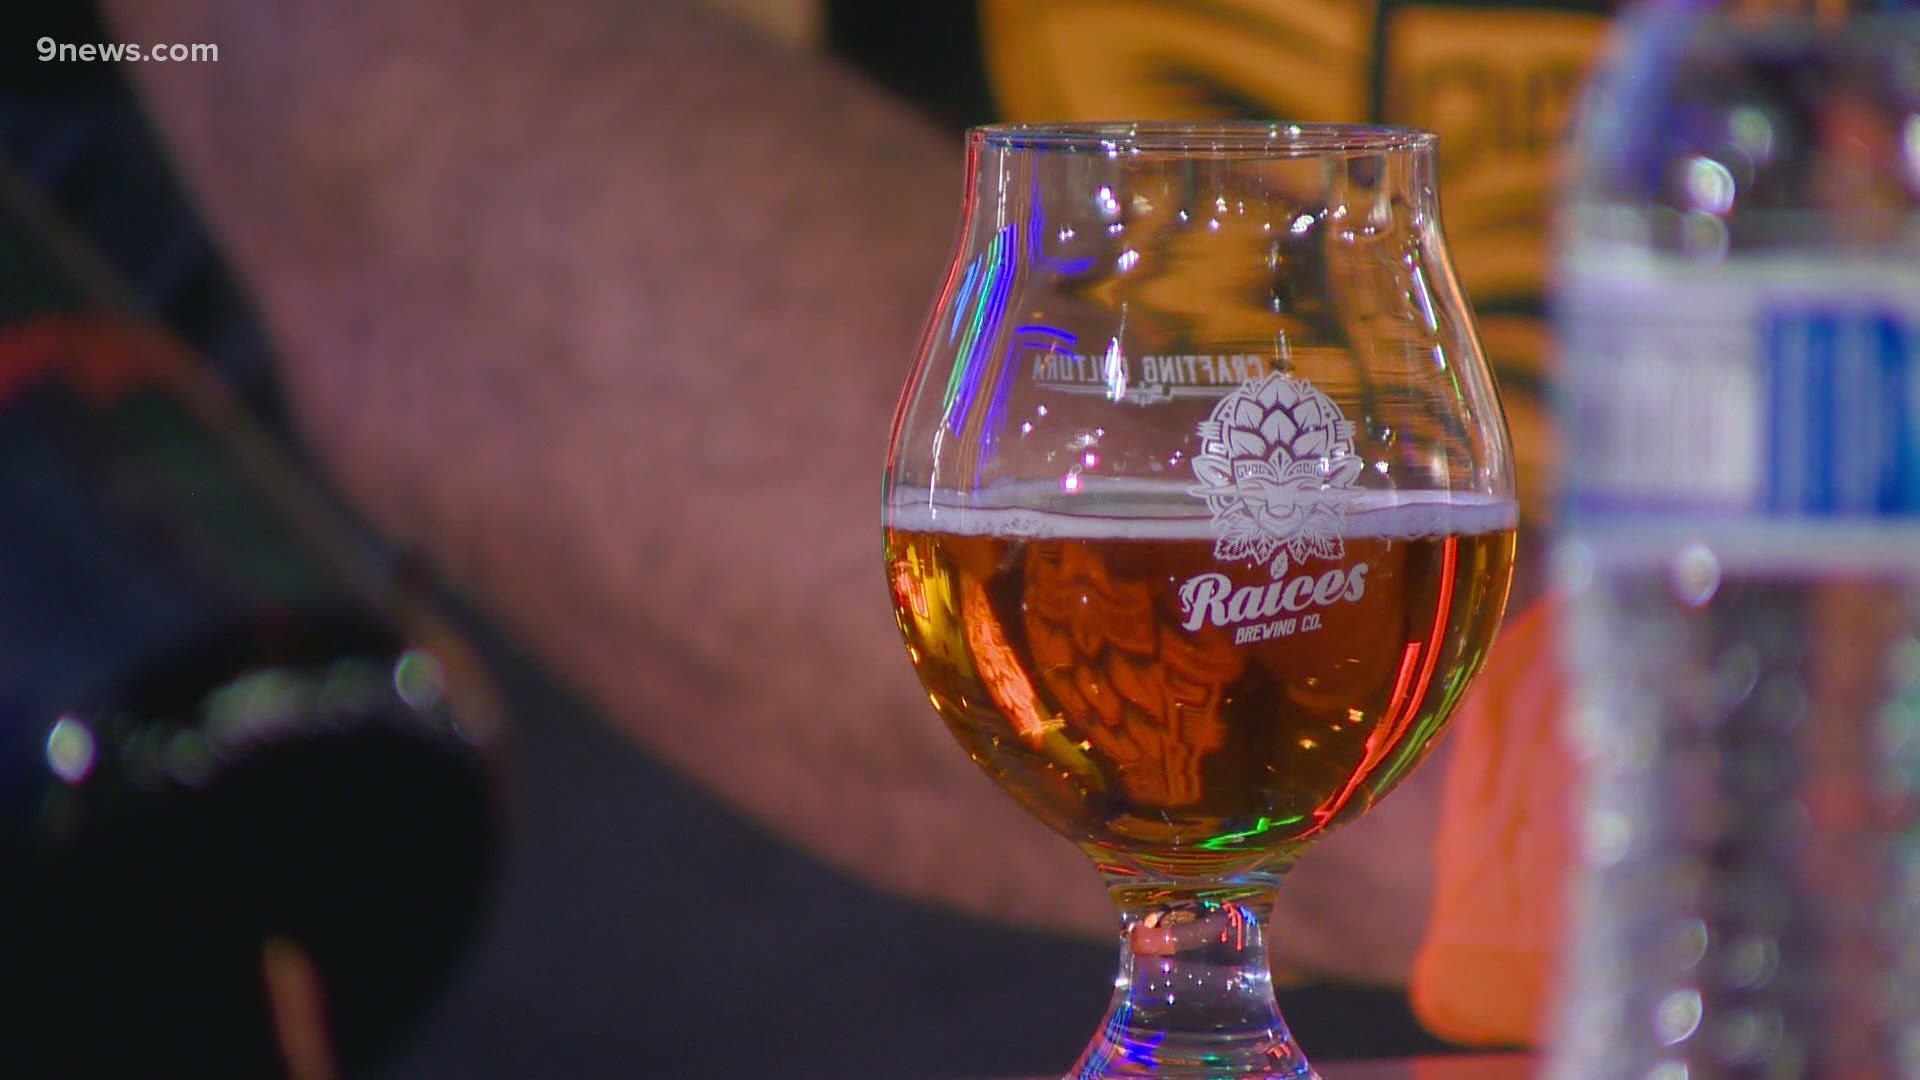 The Great American Beer Festival goes virtual in 2020, but breweries like Denver's Raices are still vying for their beers to be featured in the national competition.